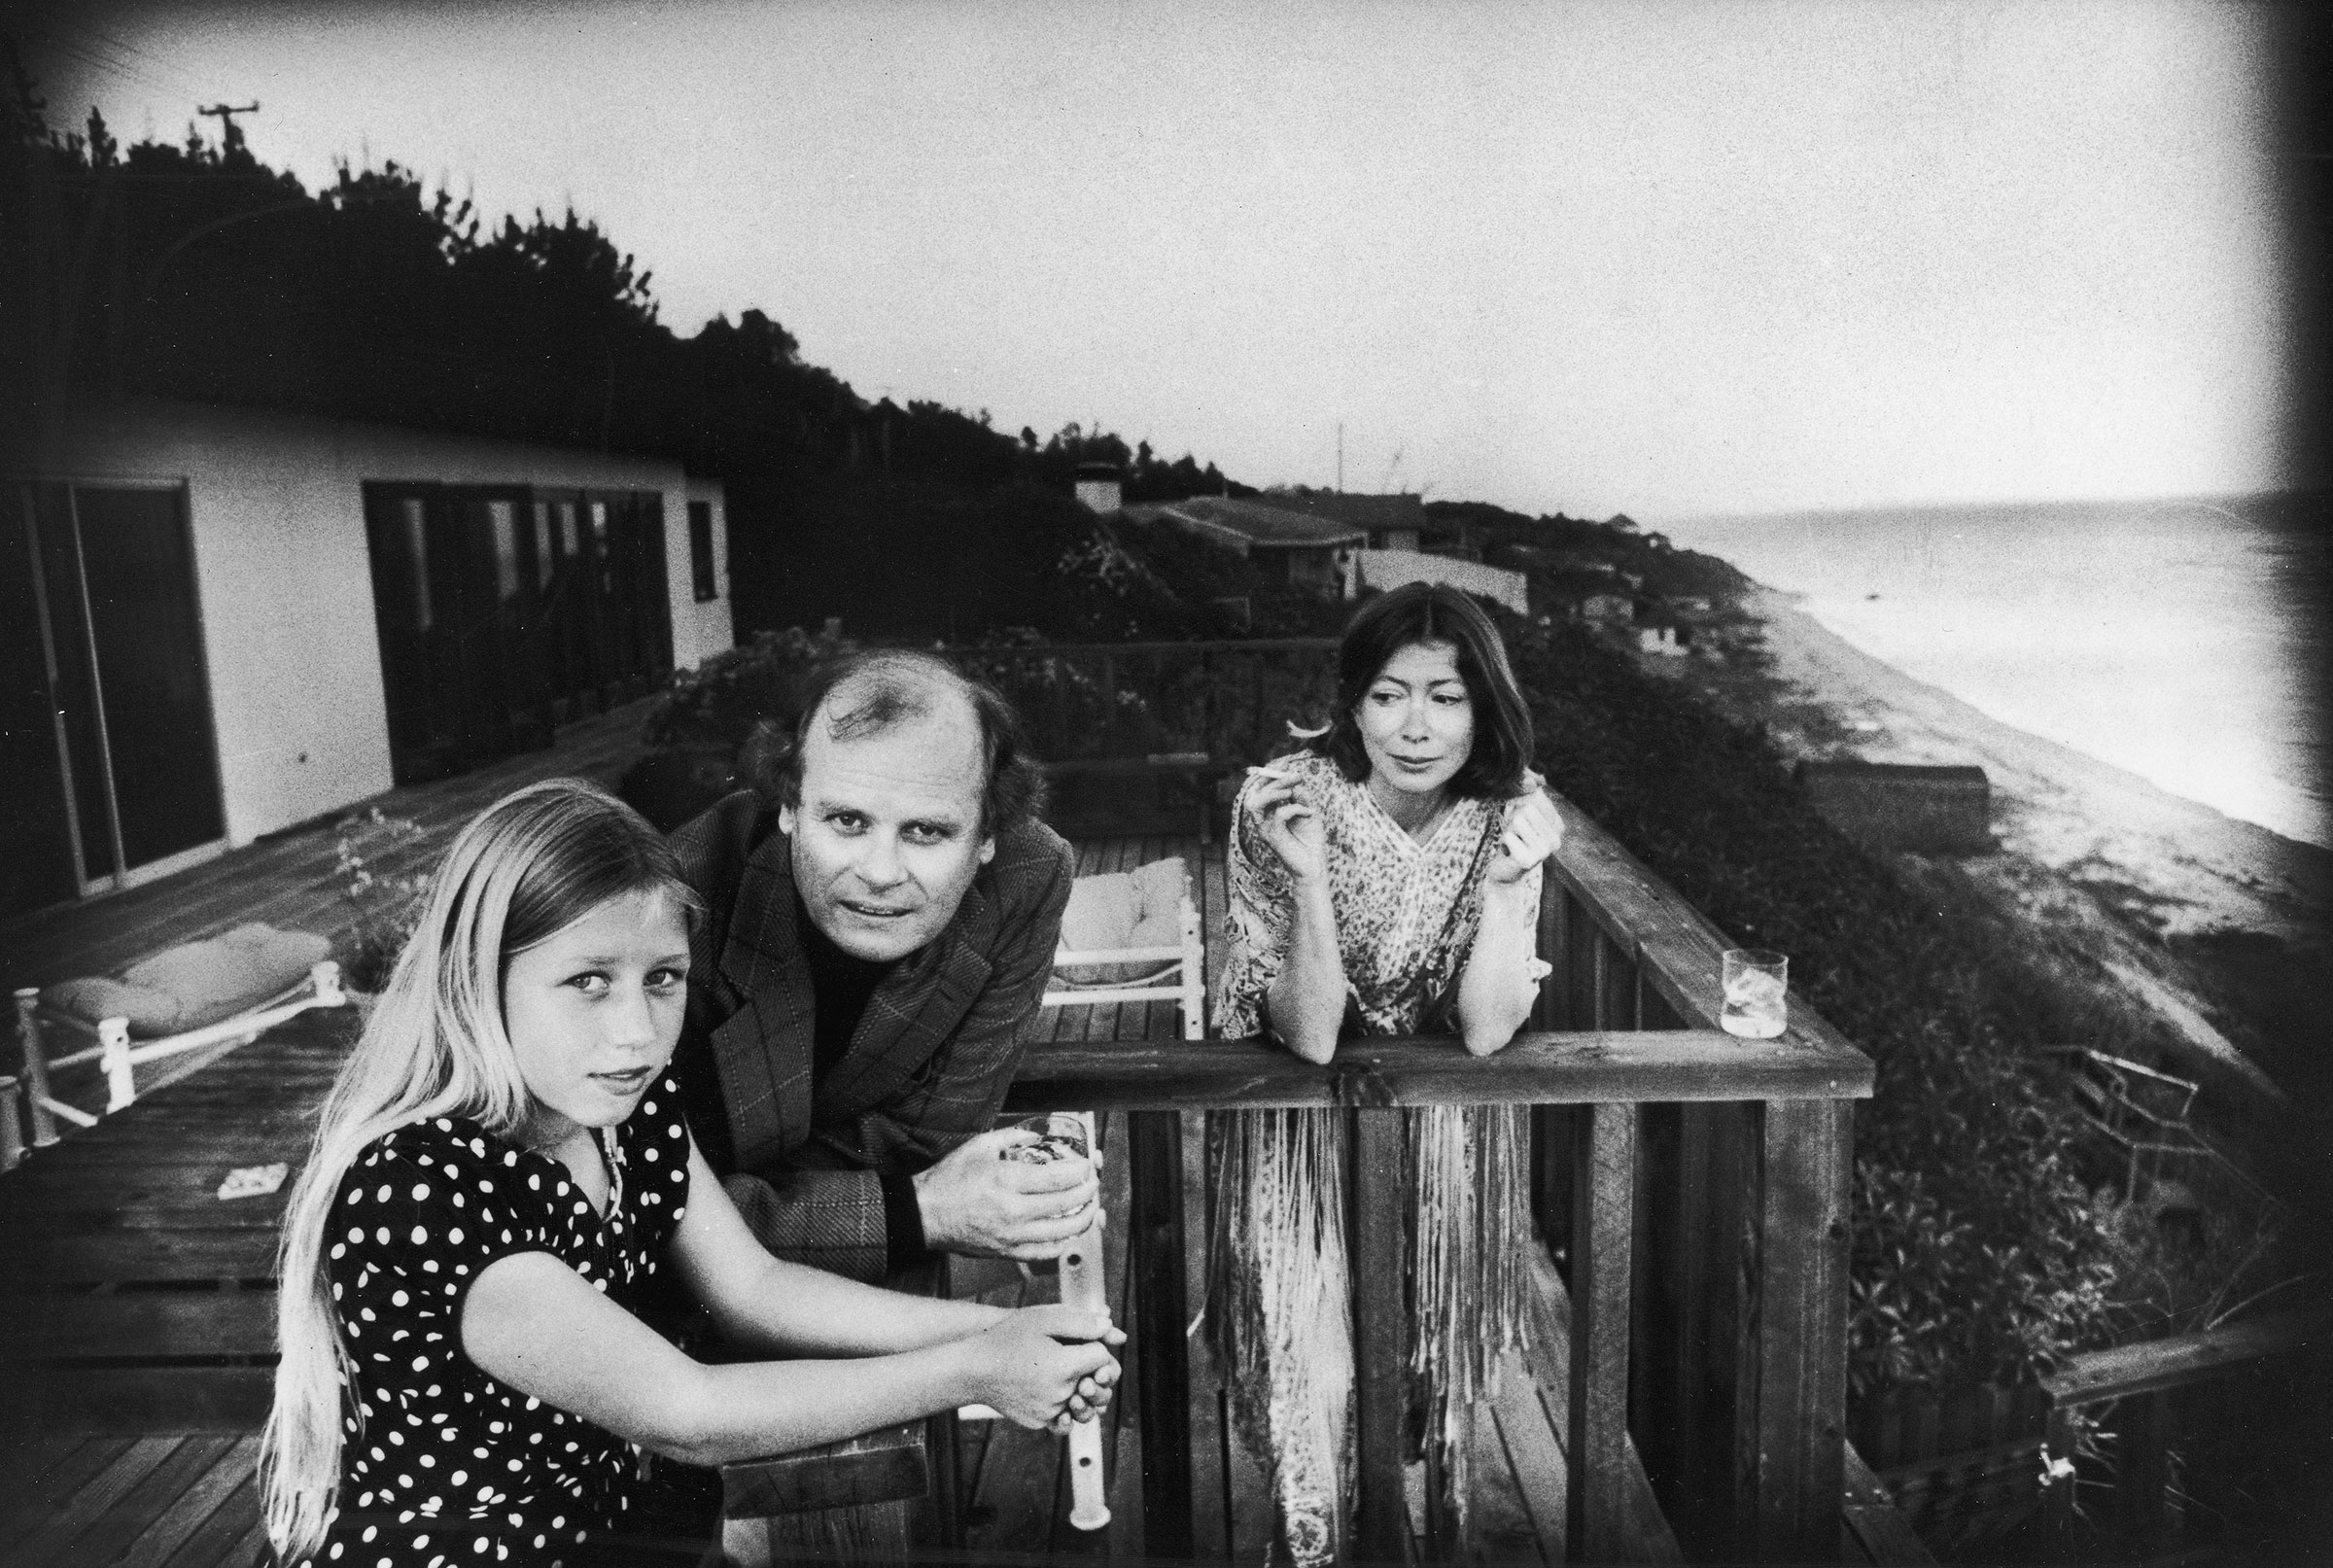 Dunne, Didion and Quintana